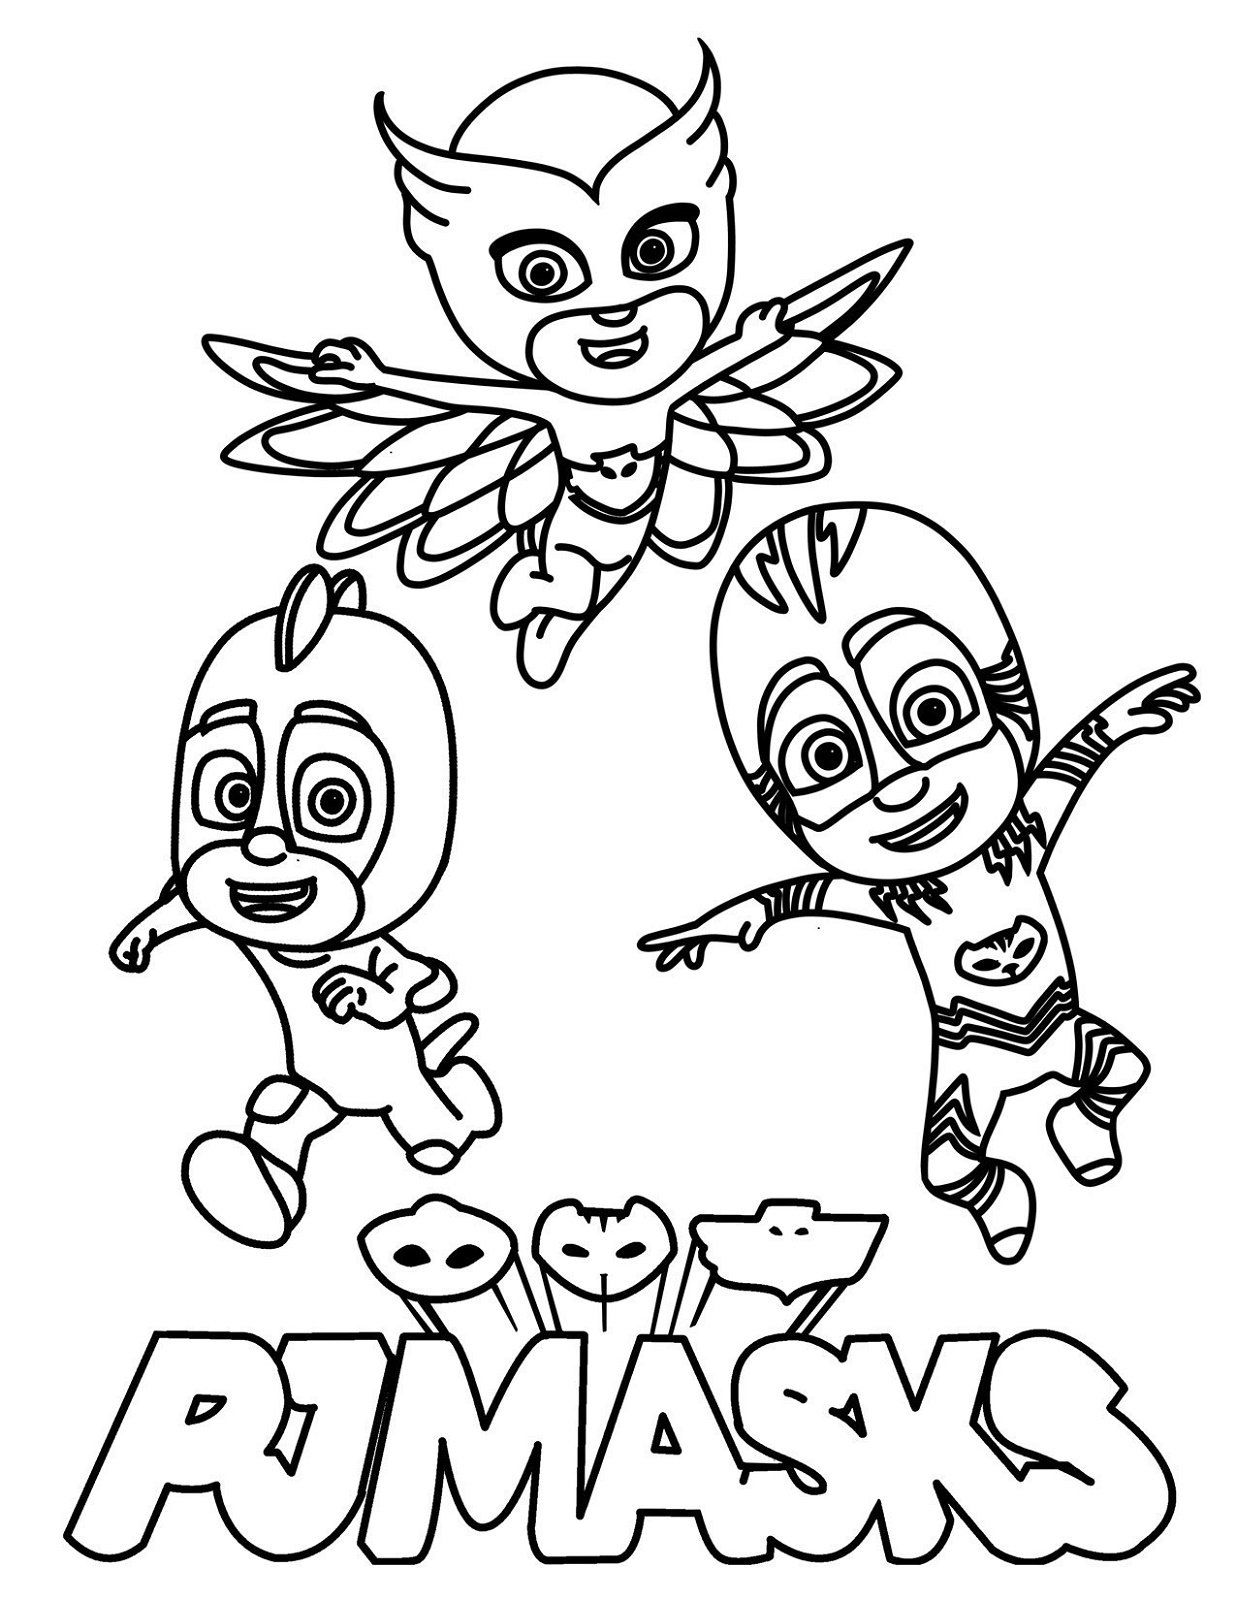 Pj Masks Coloring Pages To Print